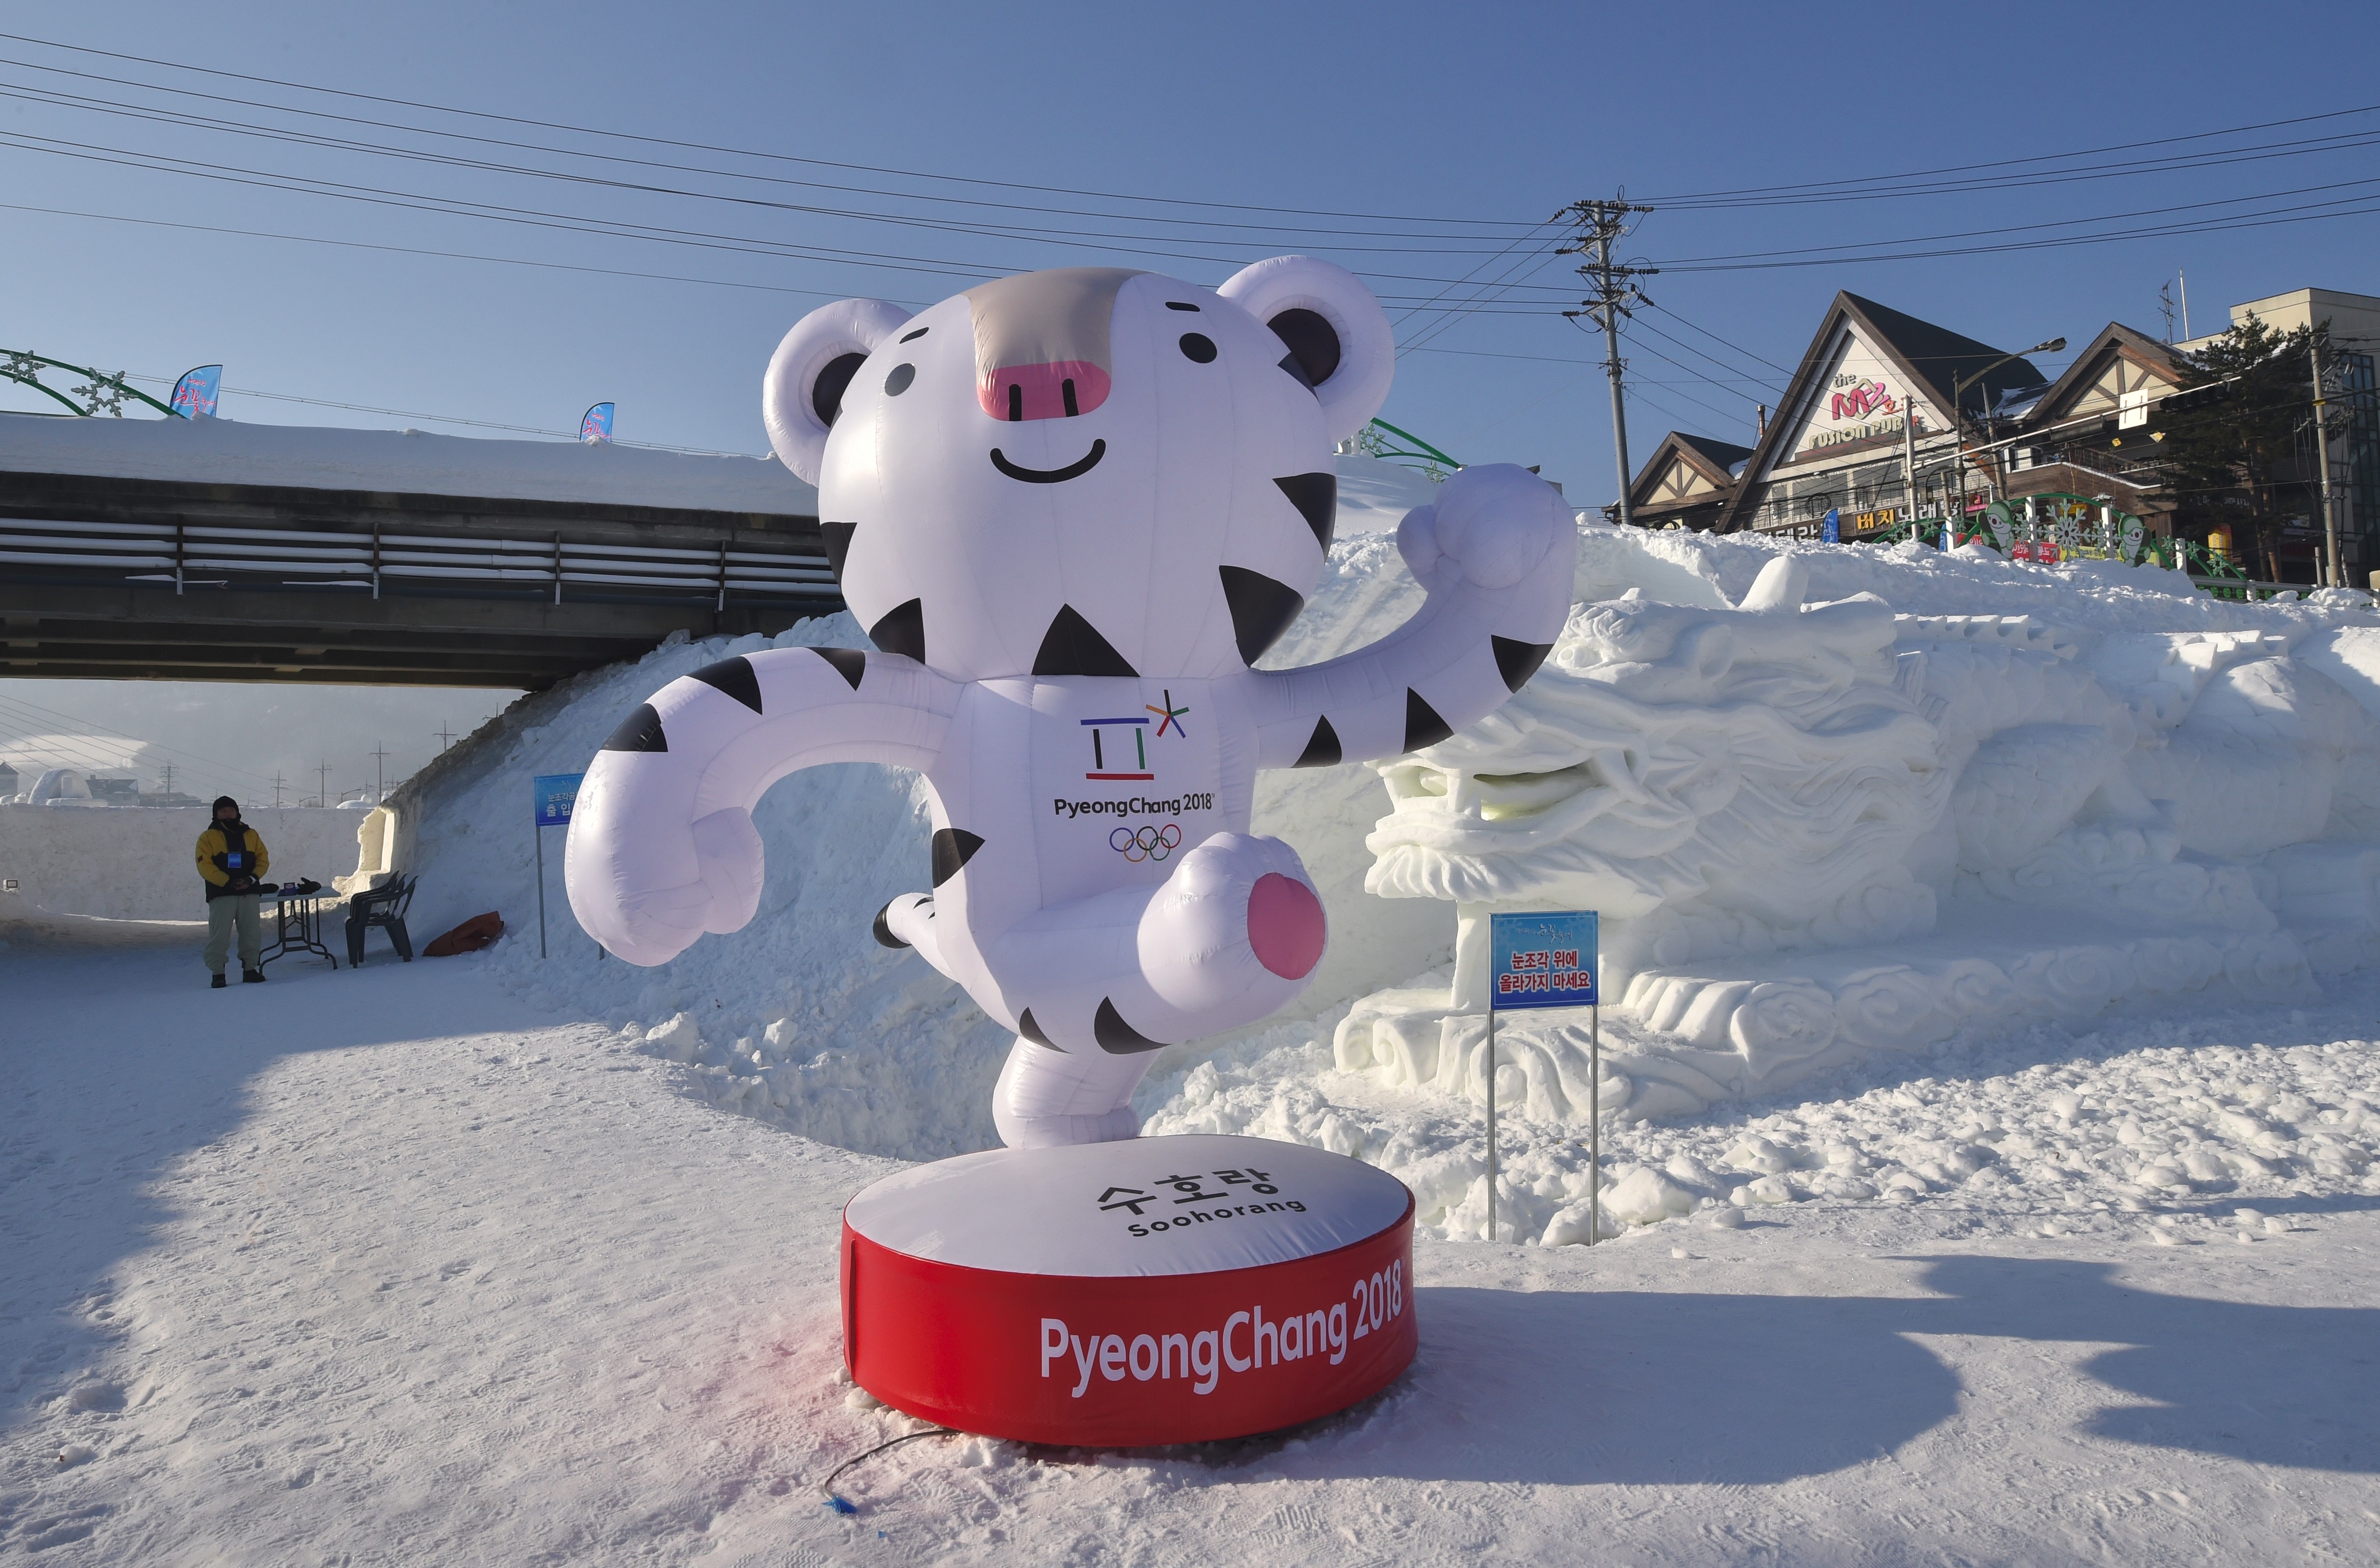 This photo taken February 4, 2017 shows the mascot for the 2018 Pyeongchang Winter Olympic Games, a white tiger named 